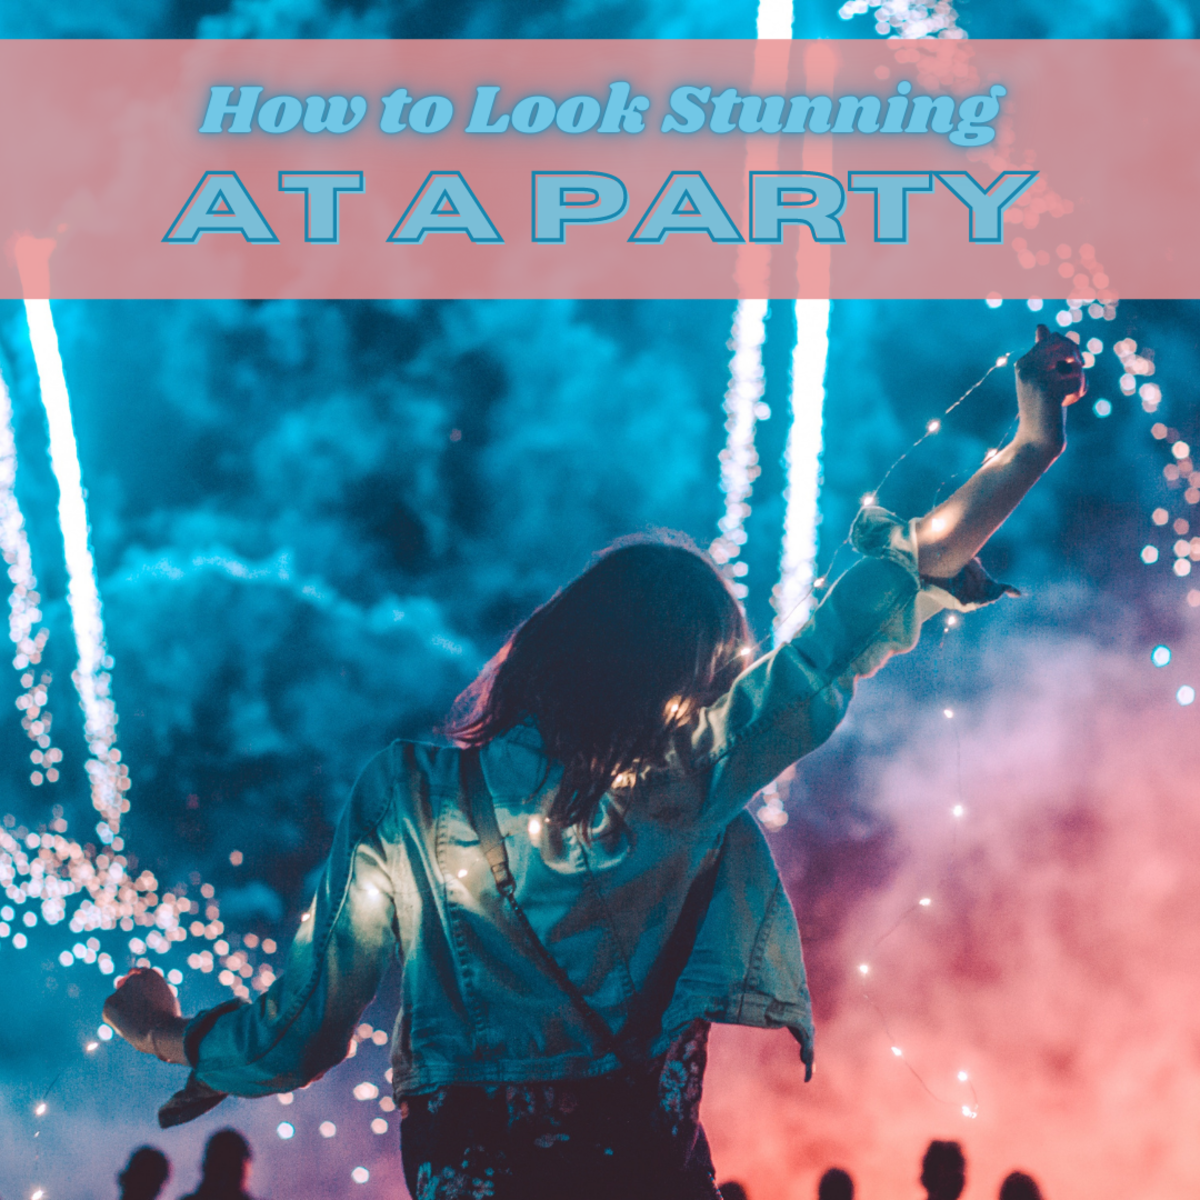 Learn how to stand out and amaze others at parties and public gatherings!